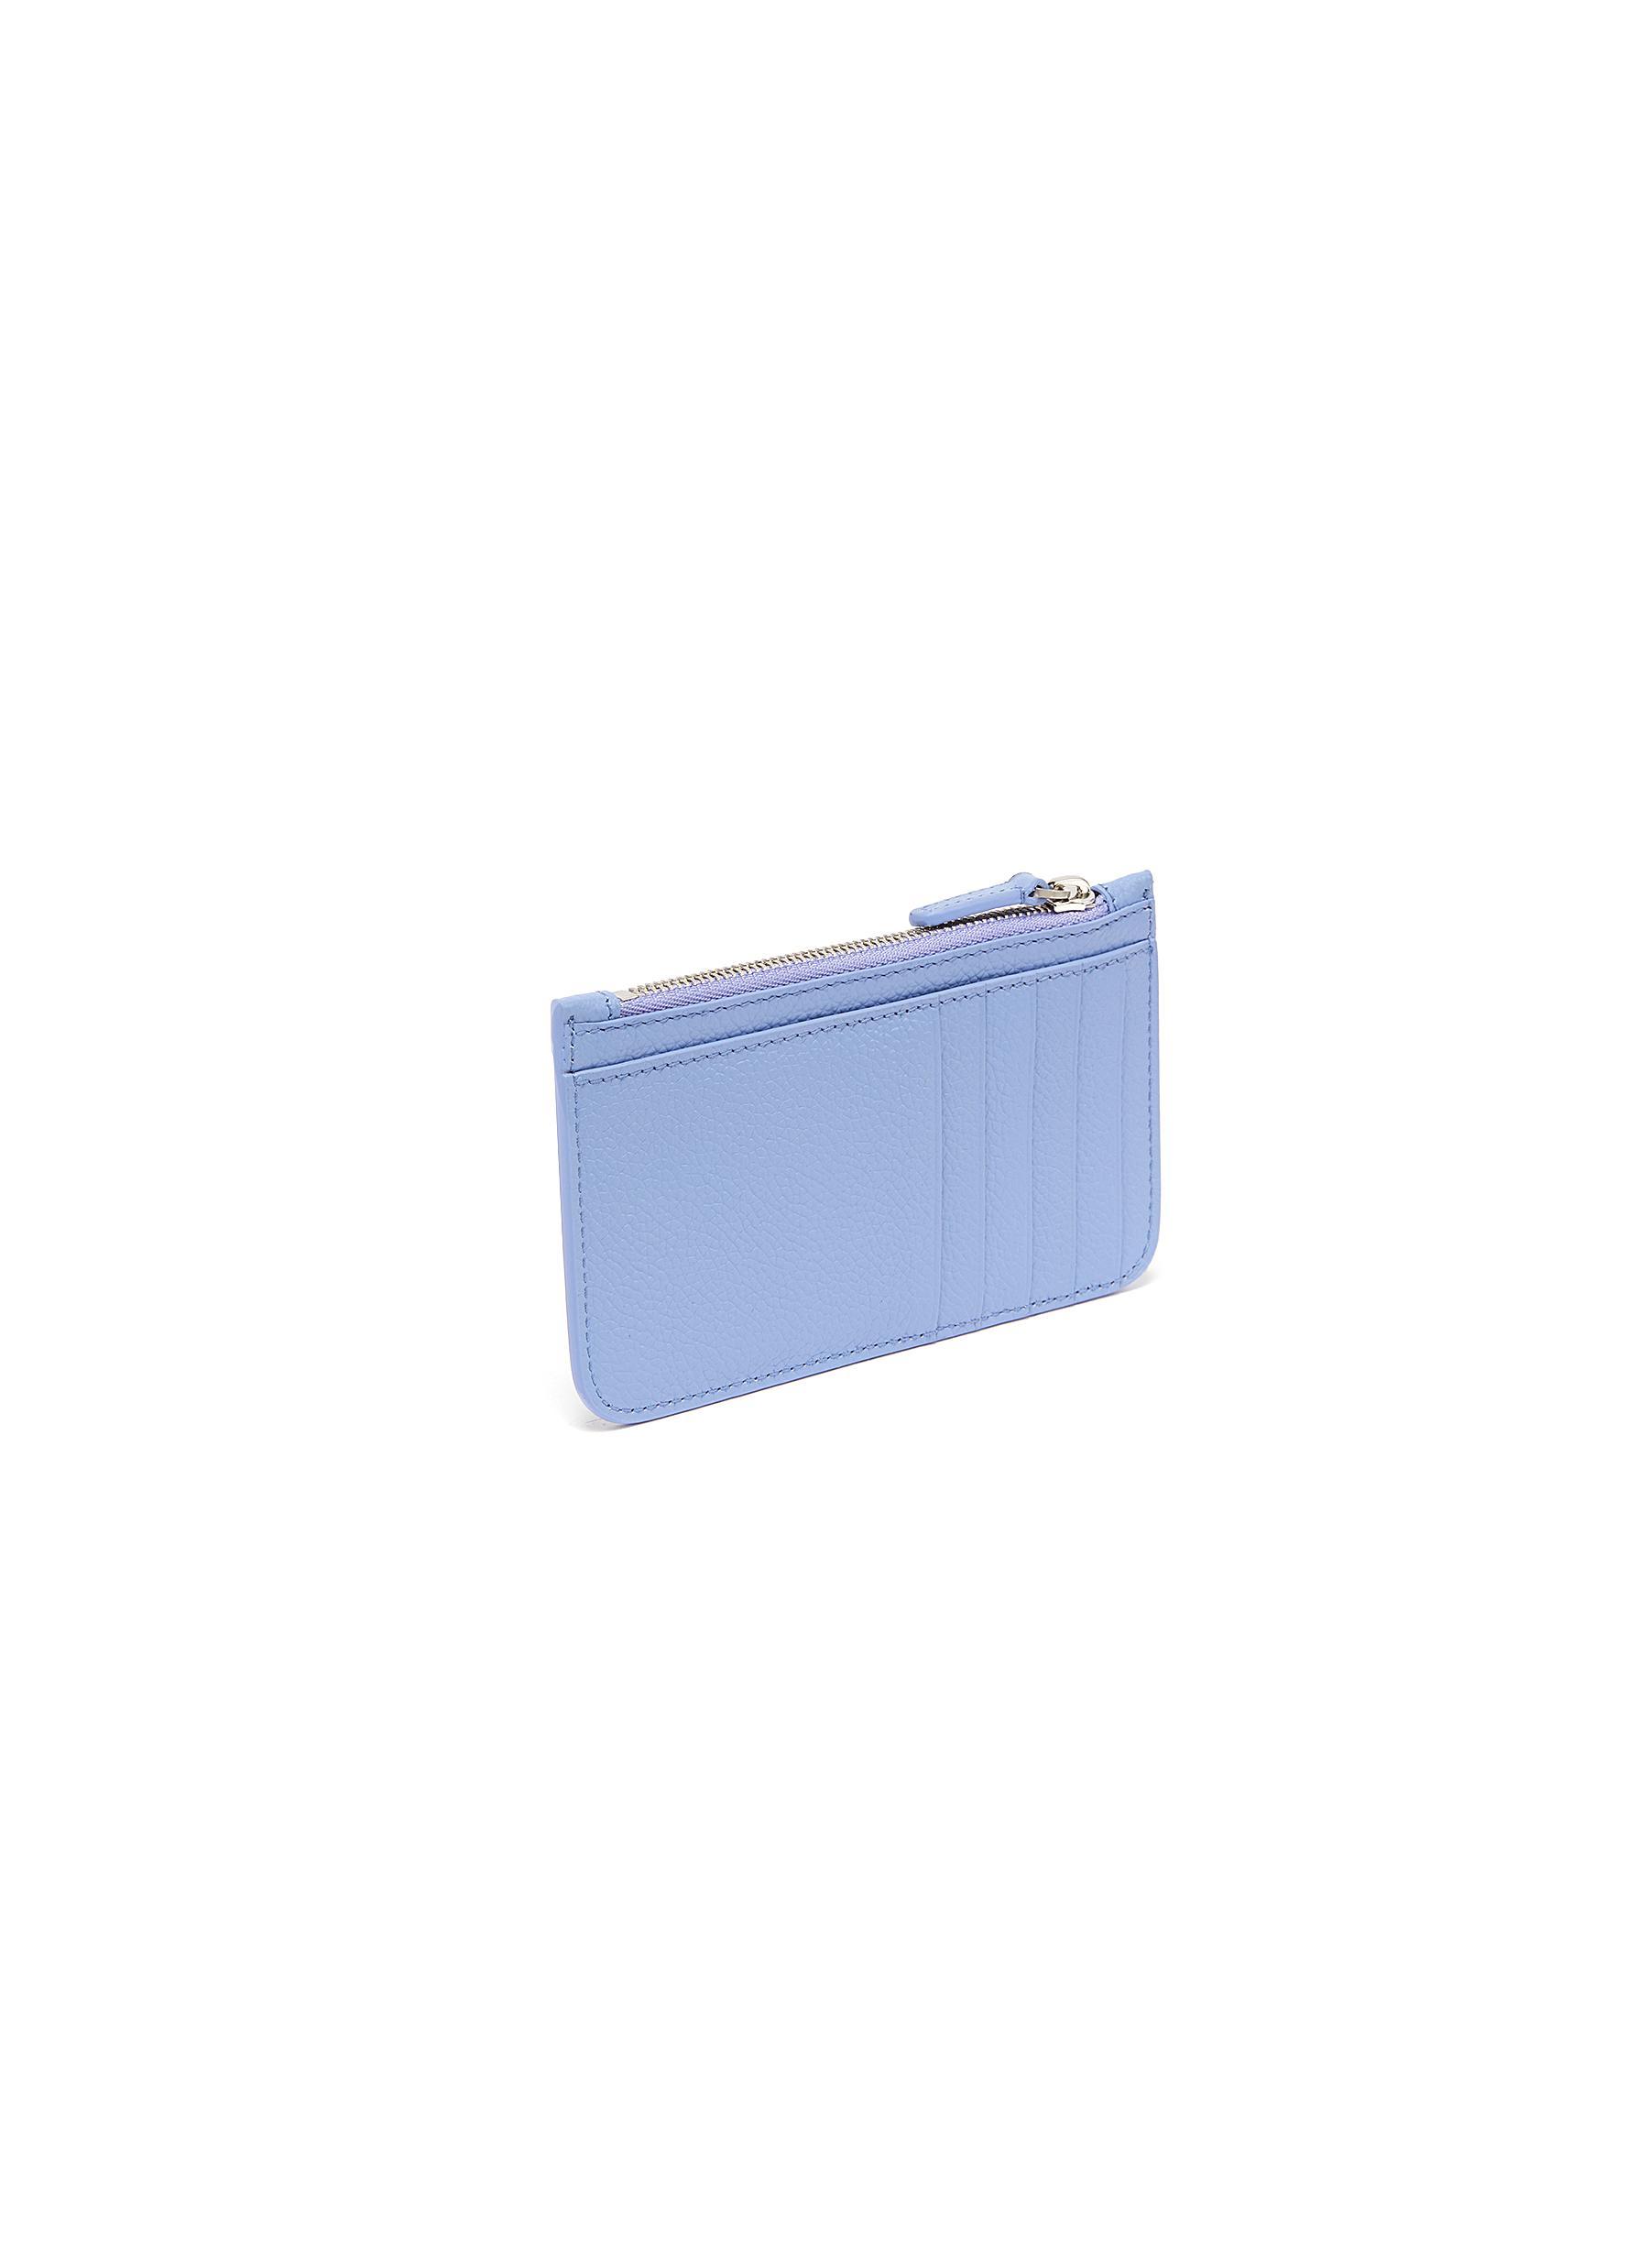 Balenciaga Leather 'cash Long' Coin And Cardholder in Light Blue 